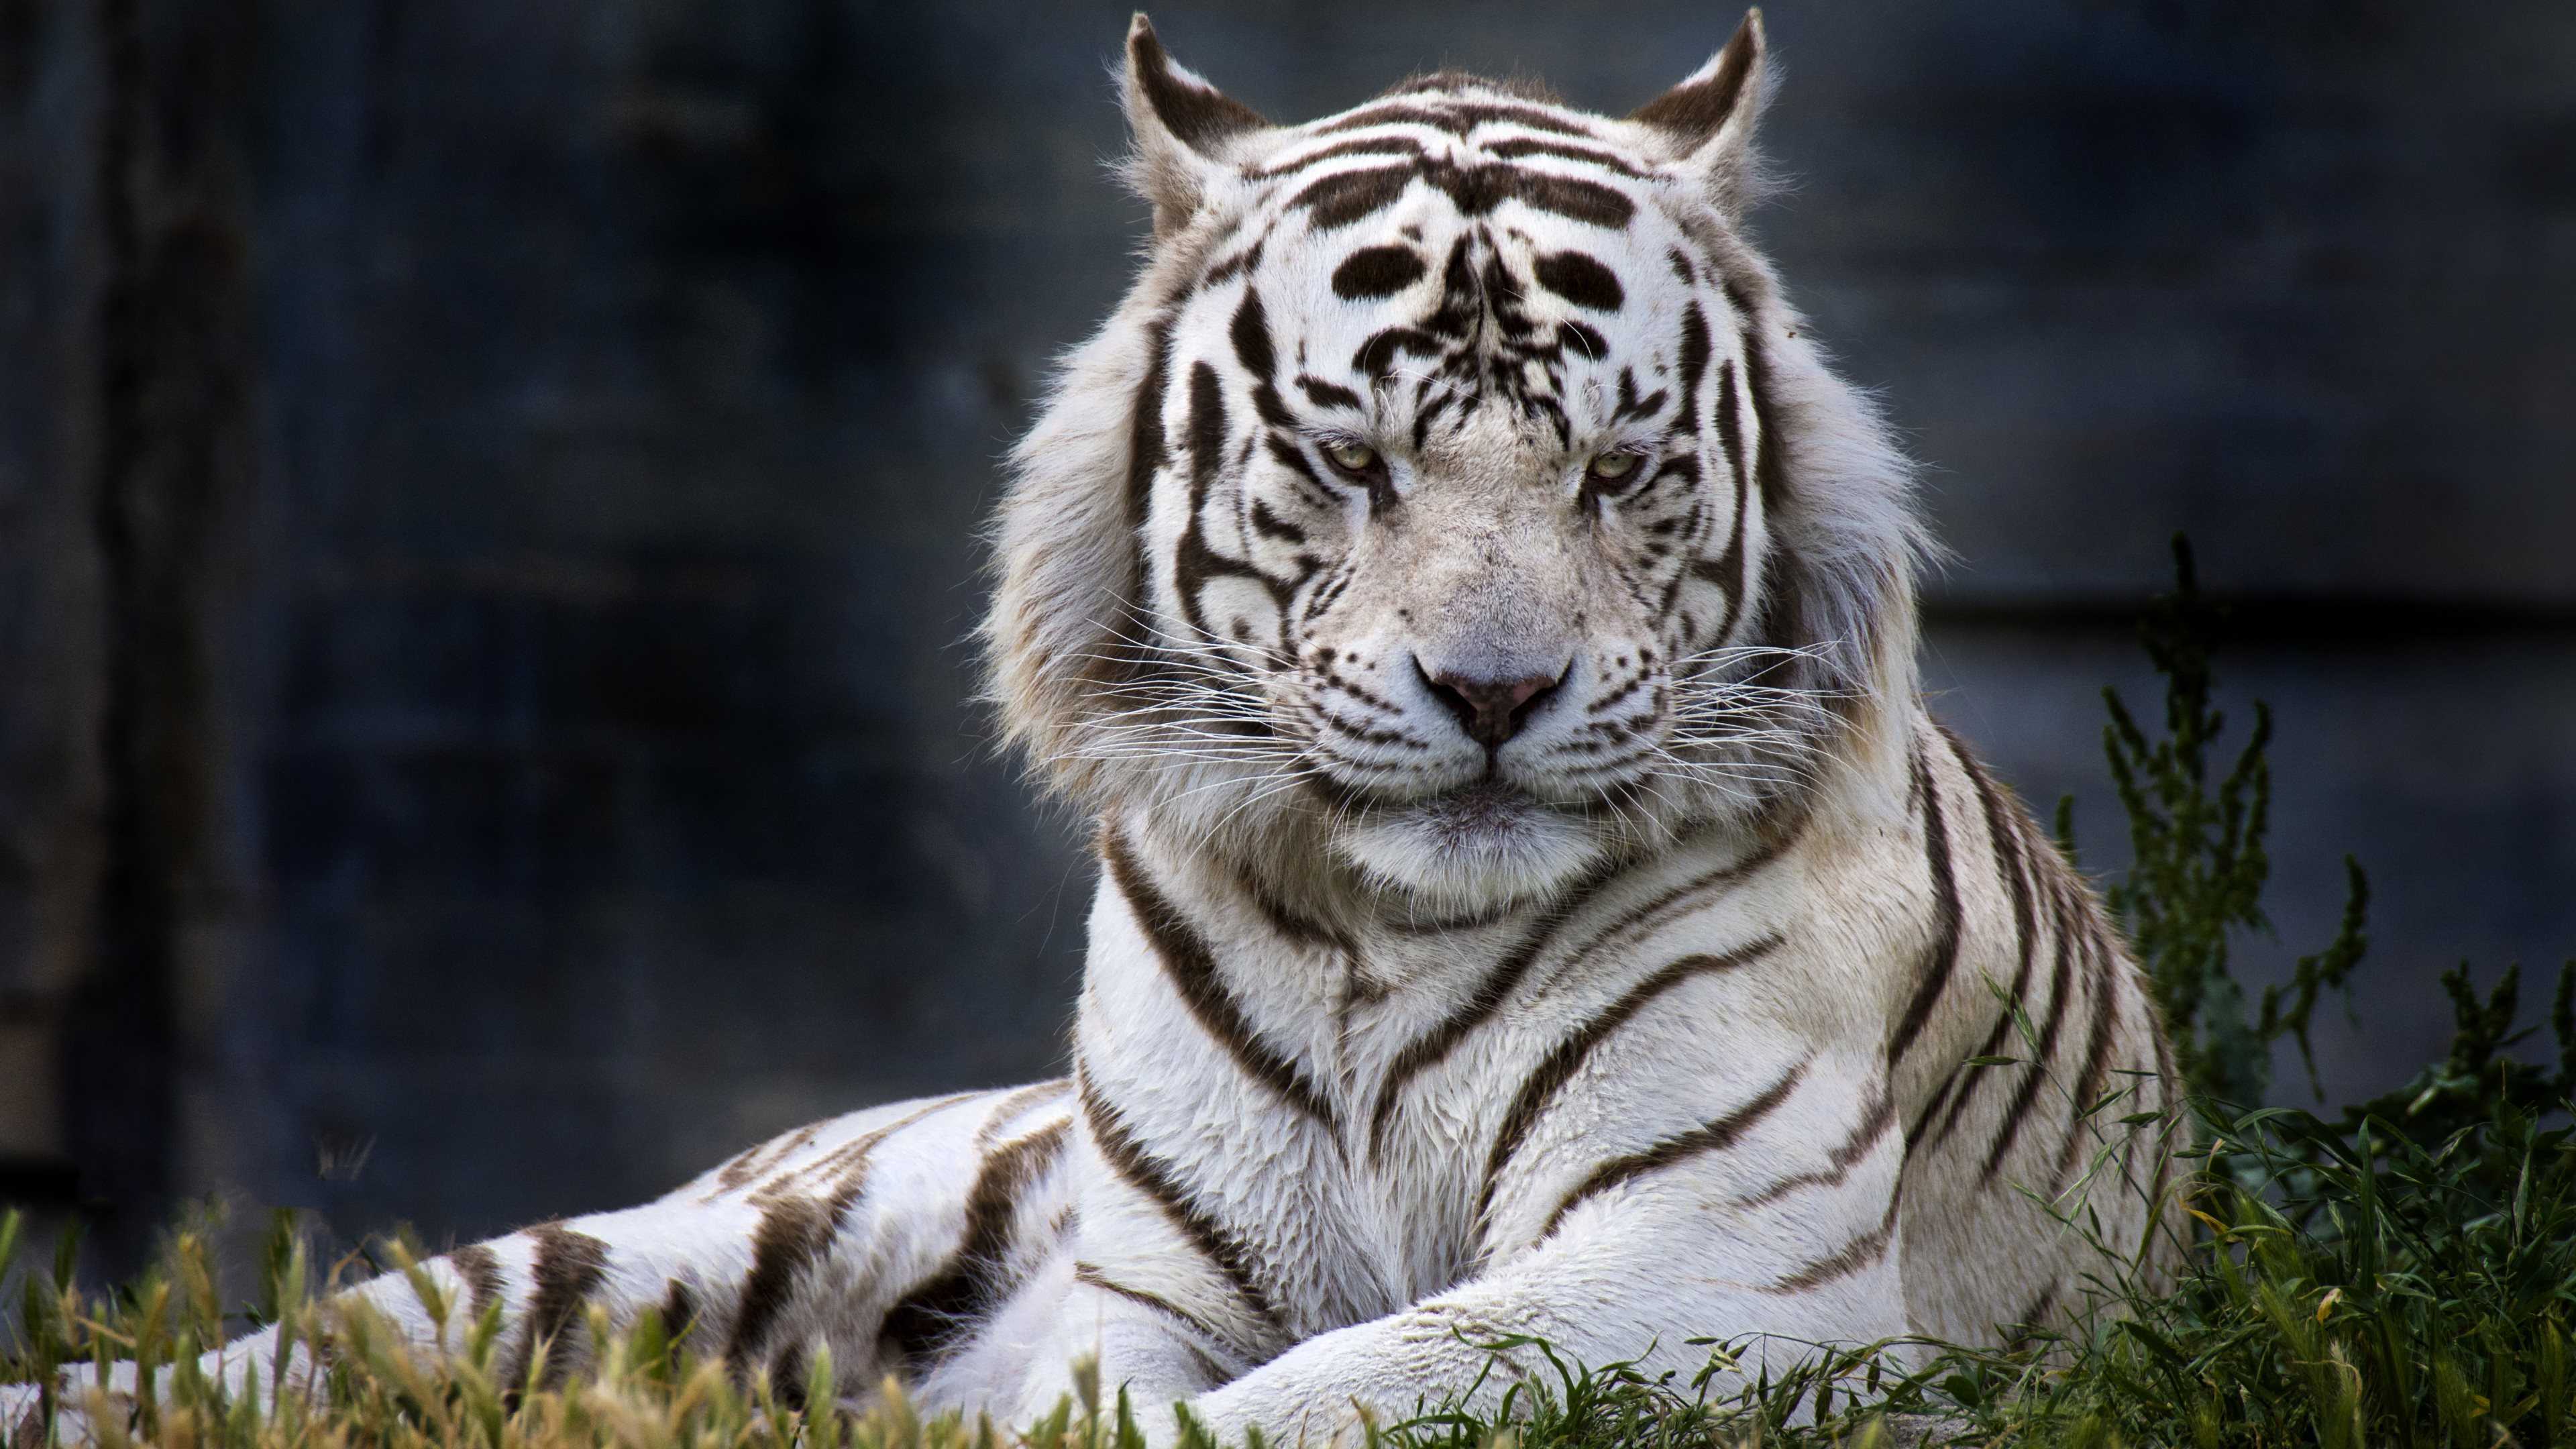 White Tiger Image Photo Picture Wallpaper HD Of Mobile Phones